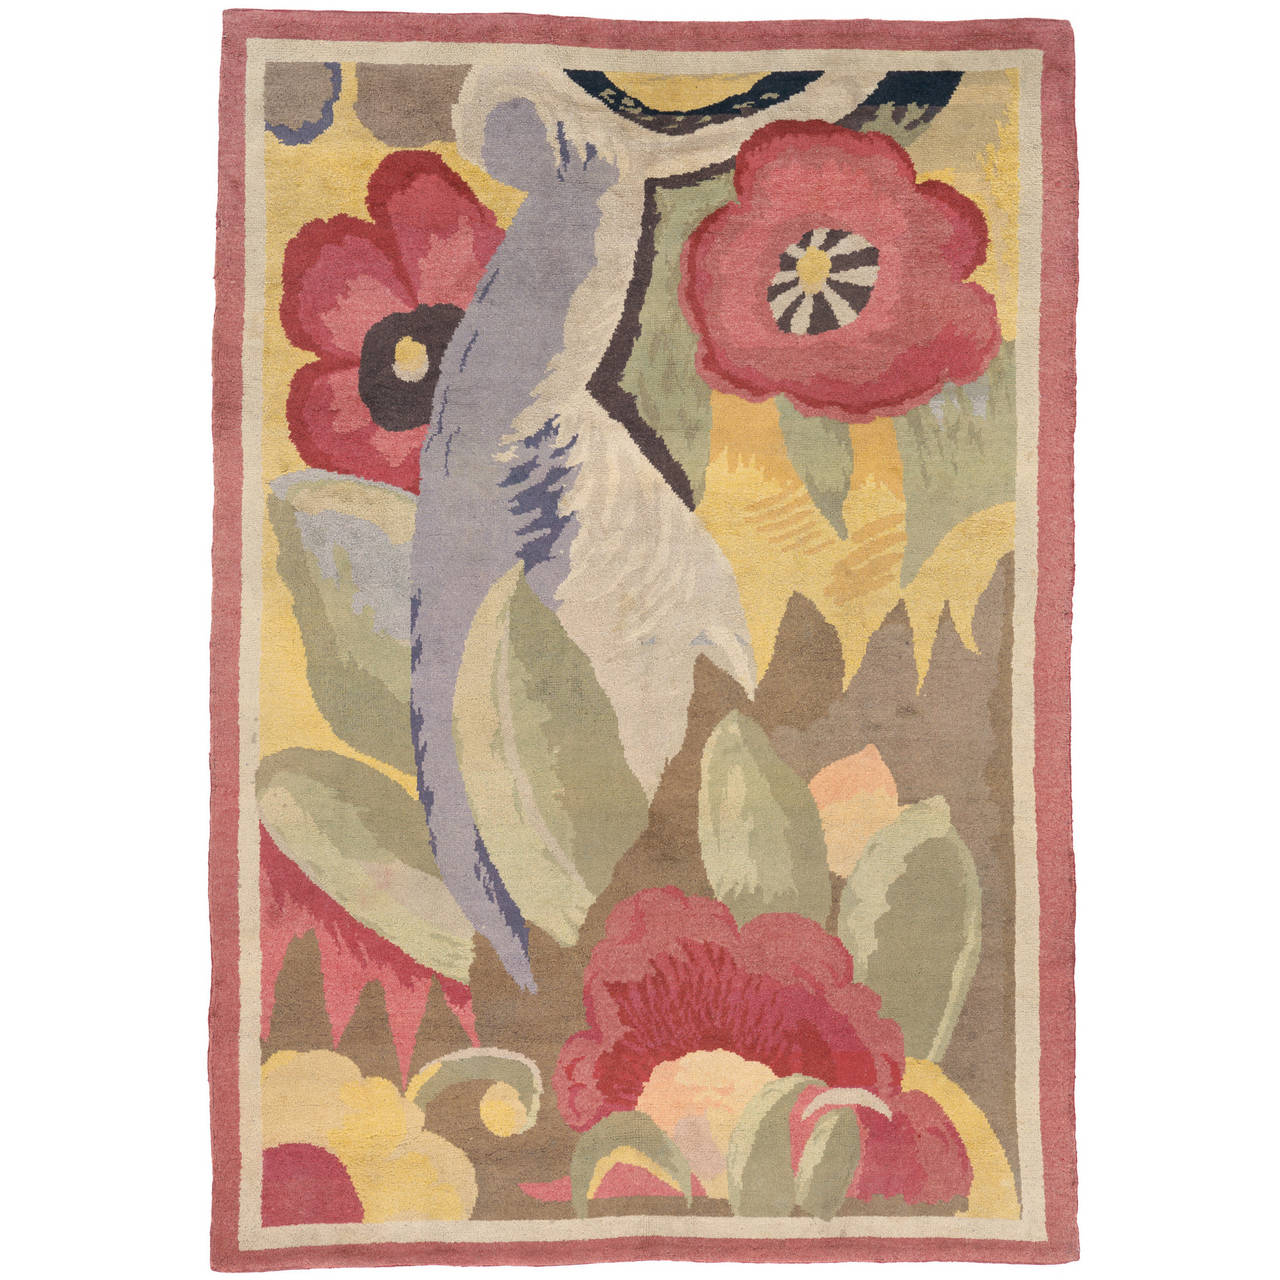 20th Century French Art Deco Carpet For Sale at 1stdibs